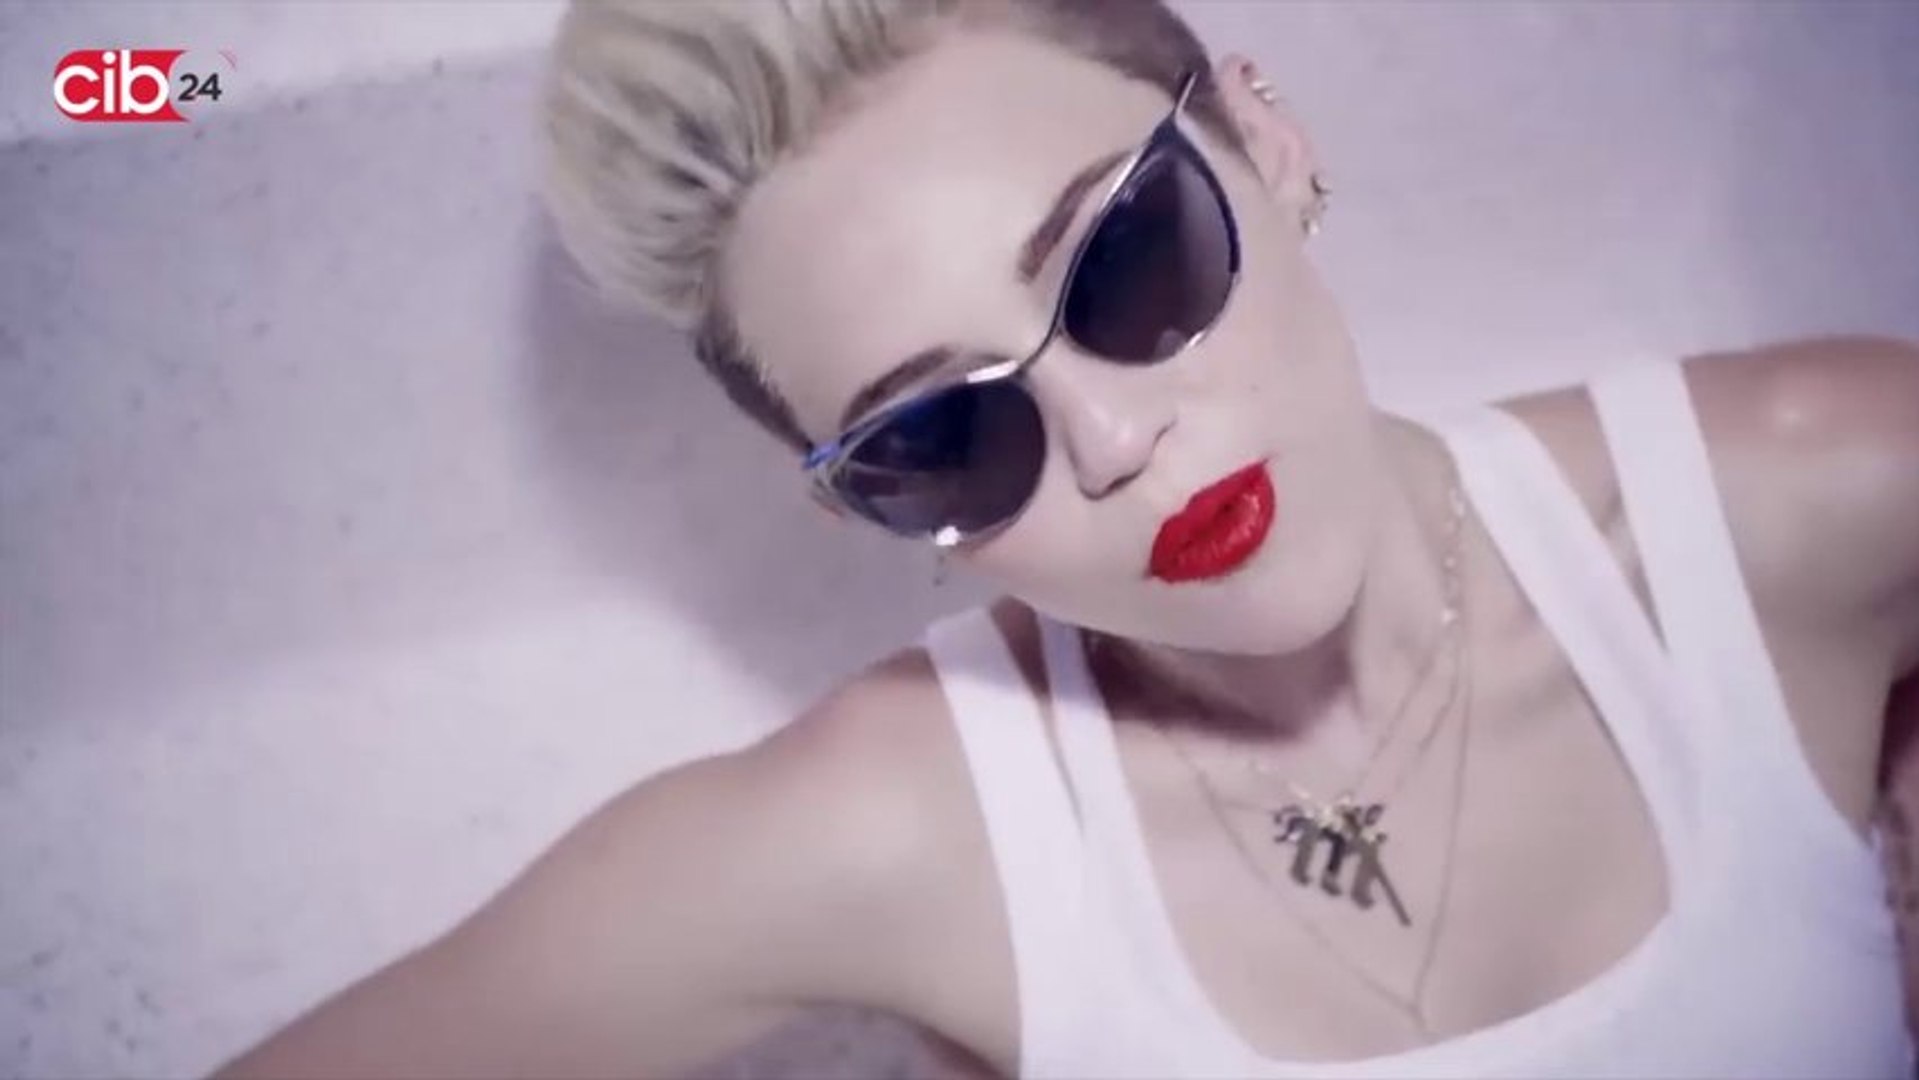 TOP SMASH - The Rise Of Miley Cyrus